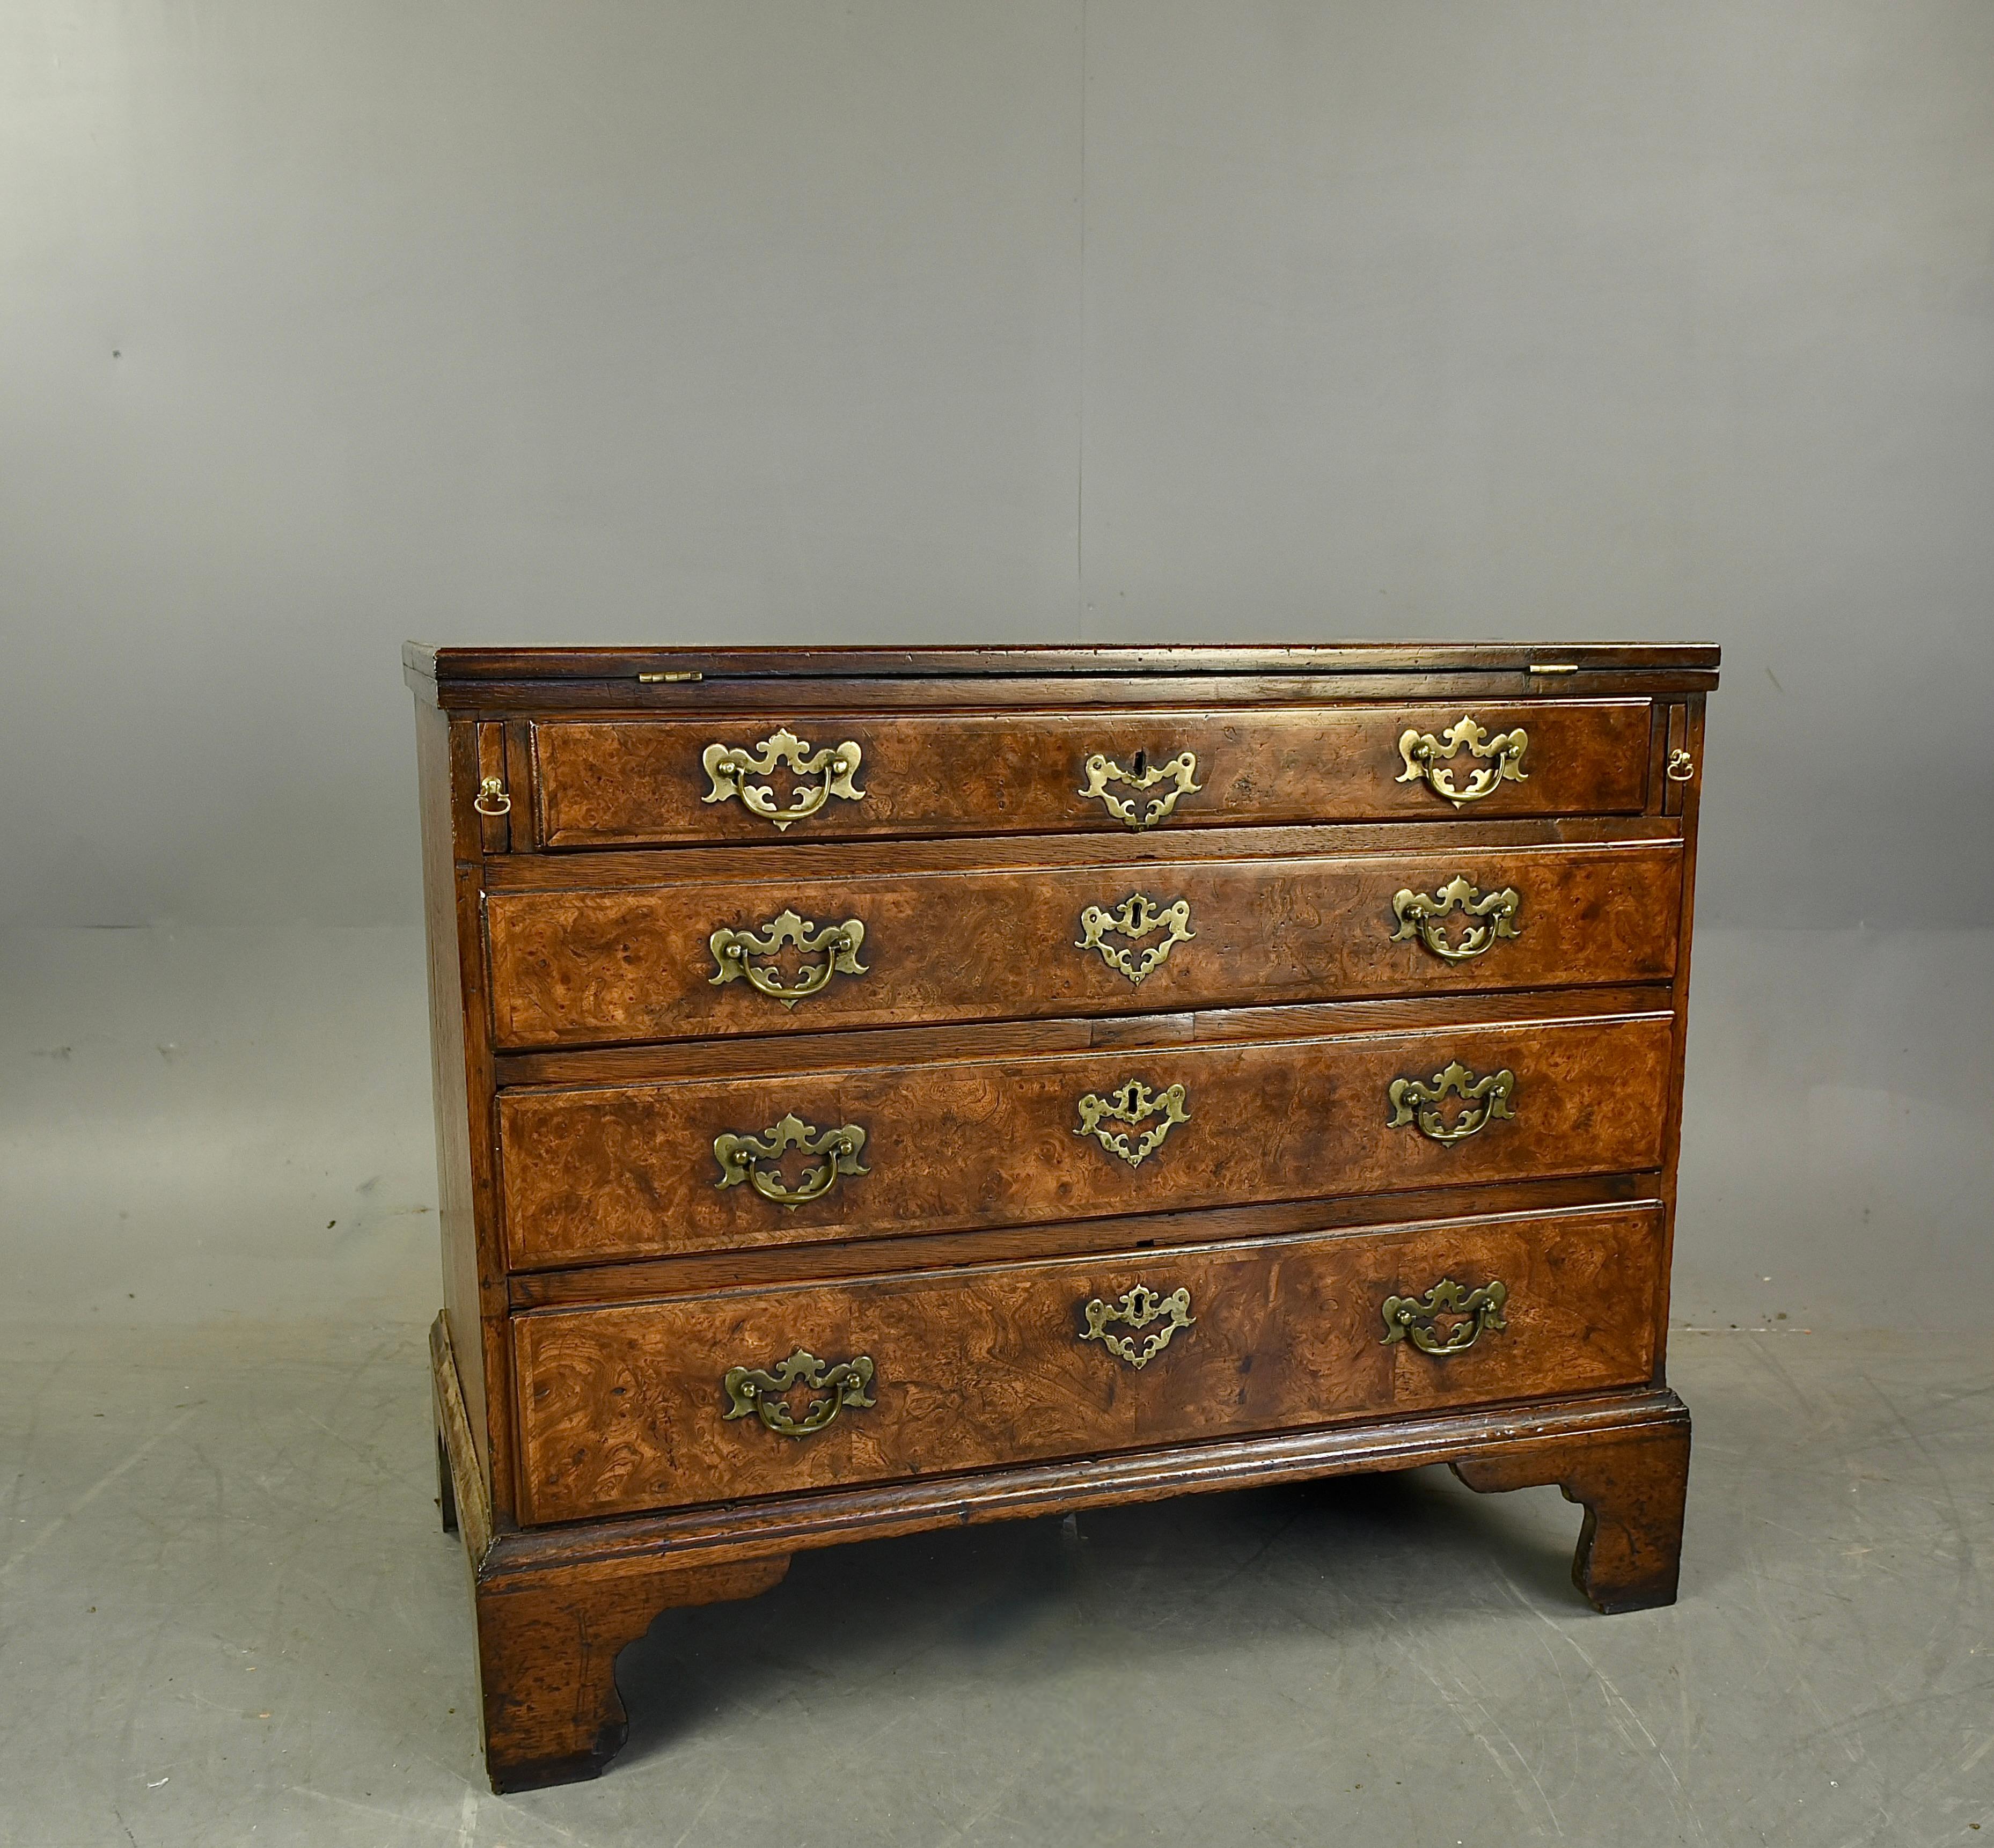 Fine quality mid 18th century burr walnut bachelors chest of drawers .
This fine chest has been fully restored to a high standard with some replacements 
It has an unusual useful 2/3 rd flip top with 1/3 fixed section .
The oak lined drawers all run